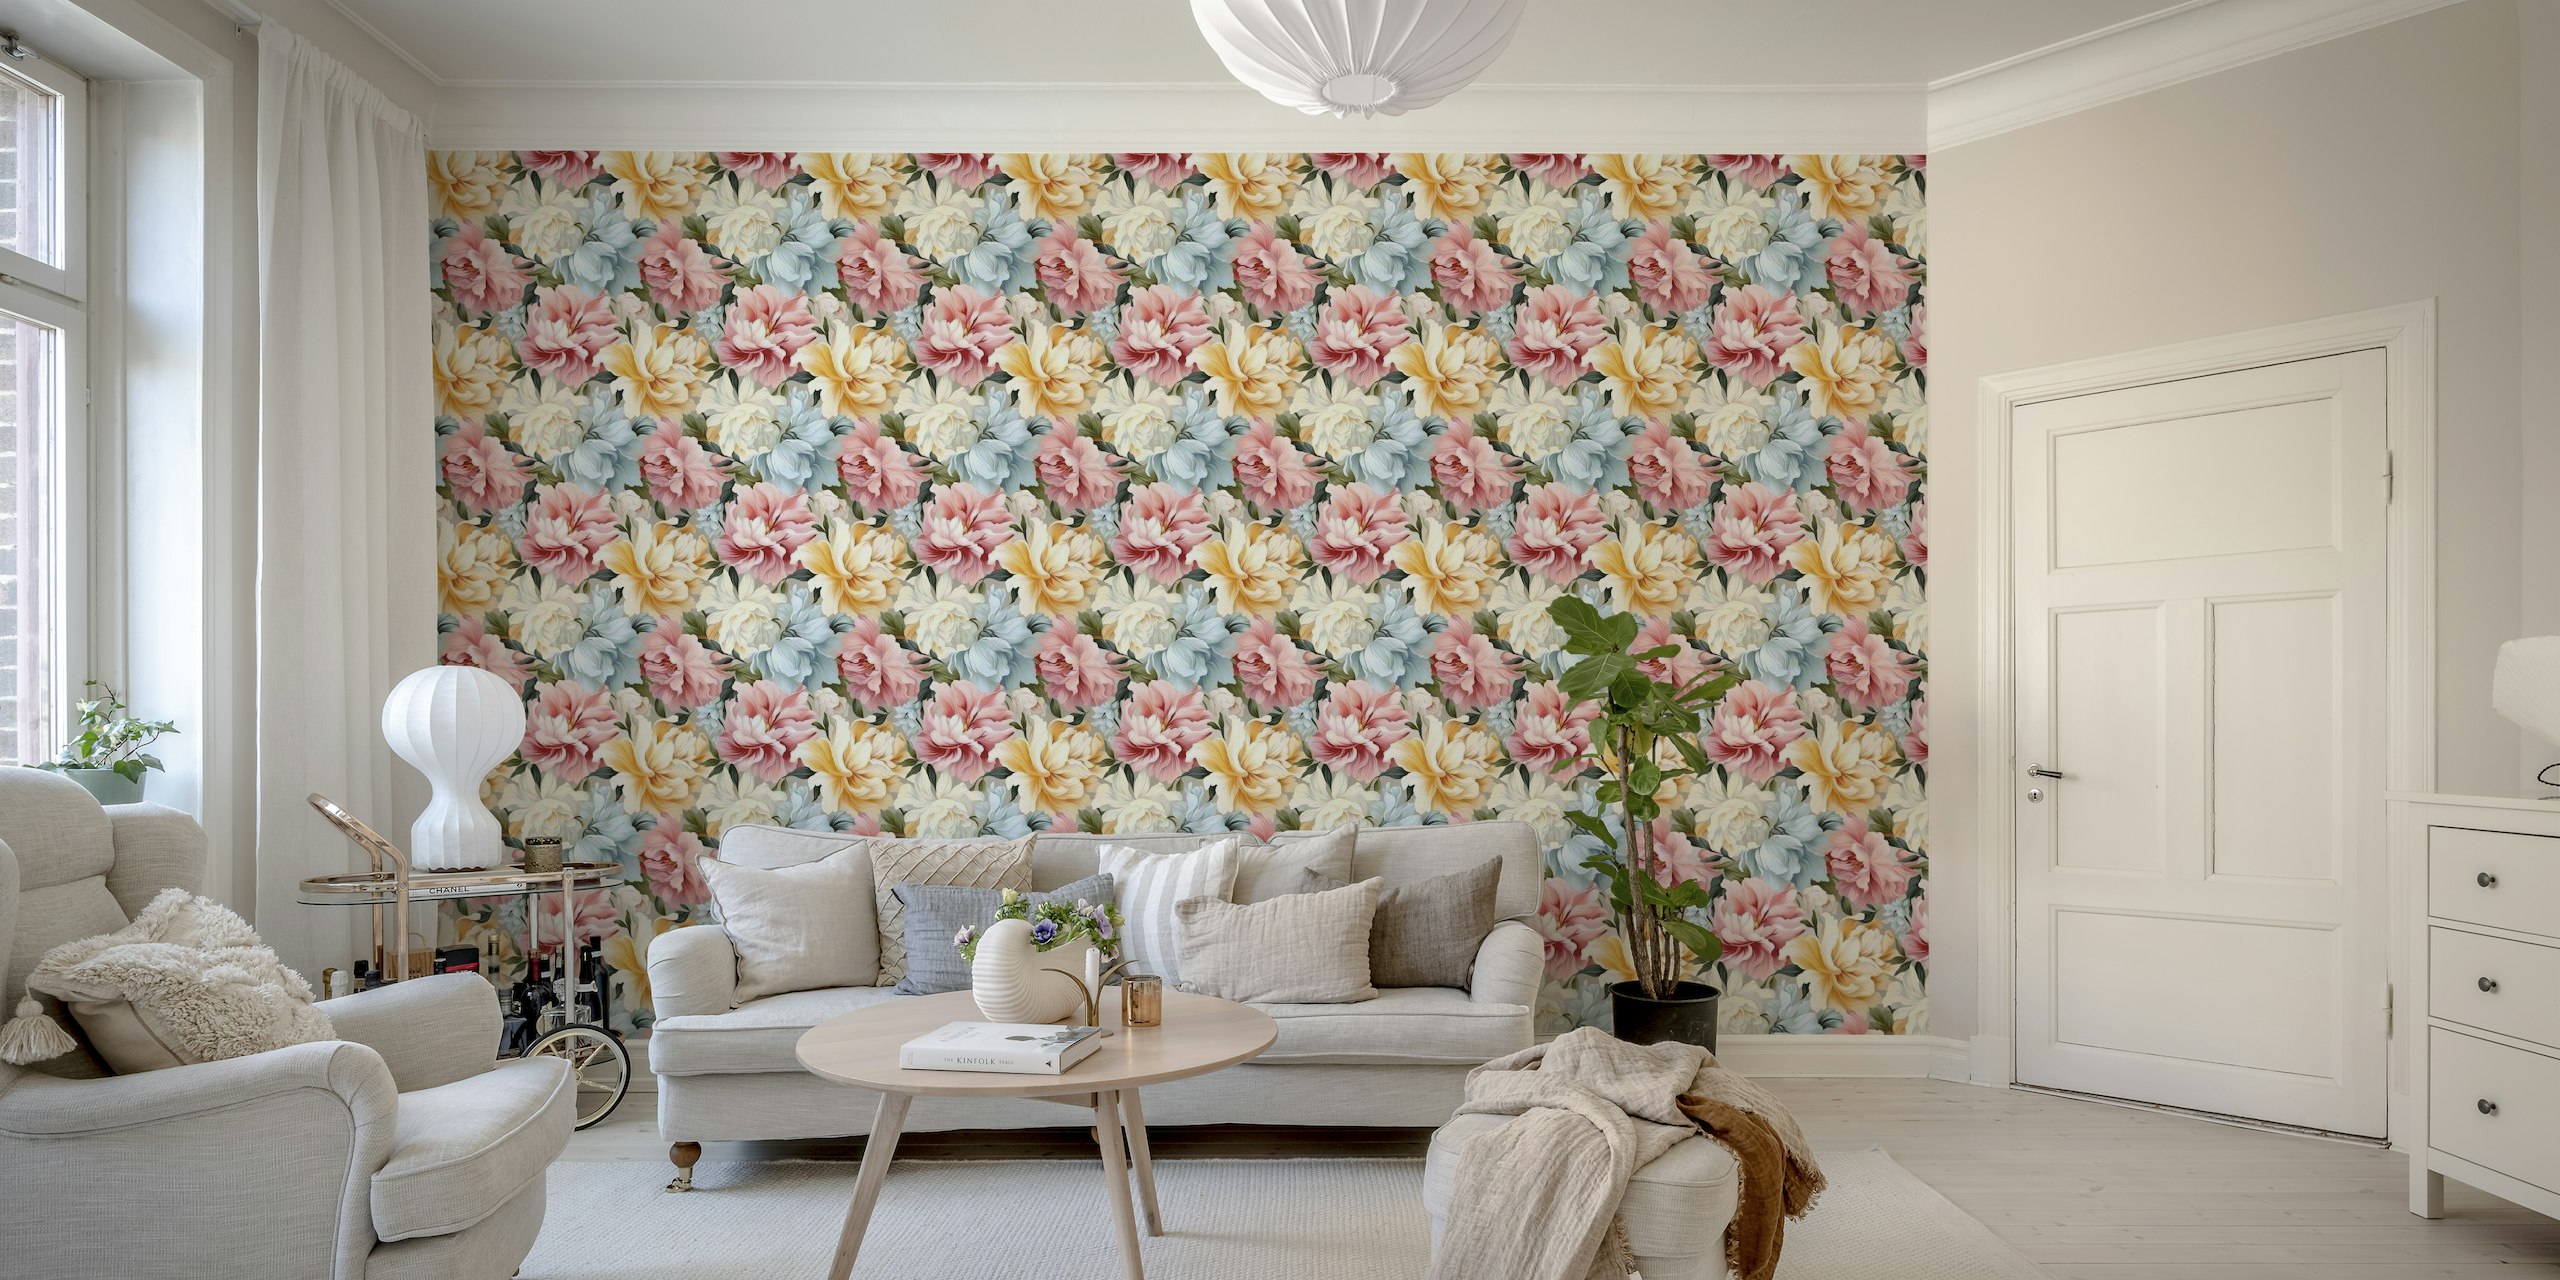 Blossom Bliss Peony Wall Covering ταπετσαρία